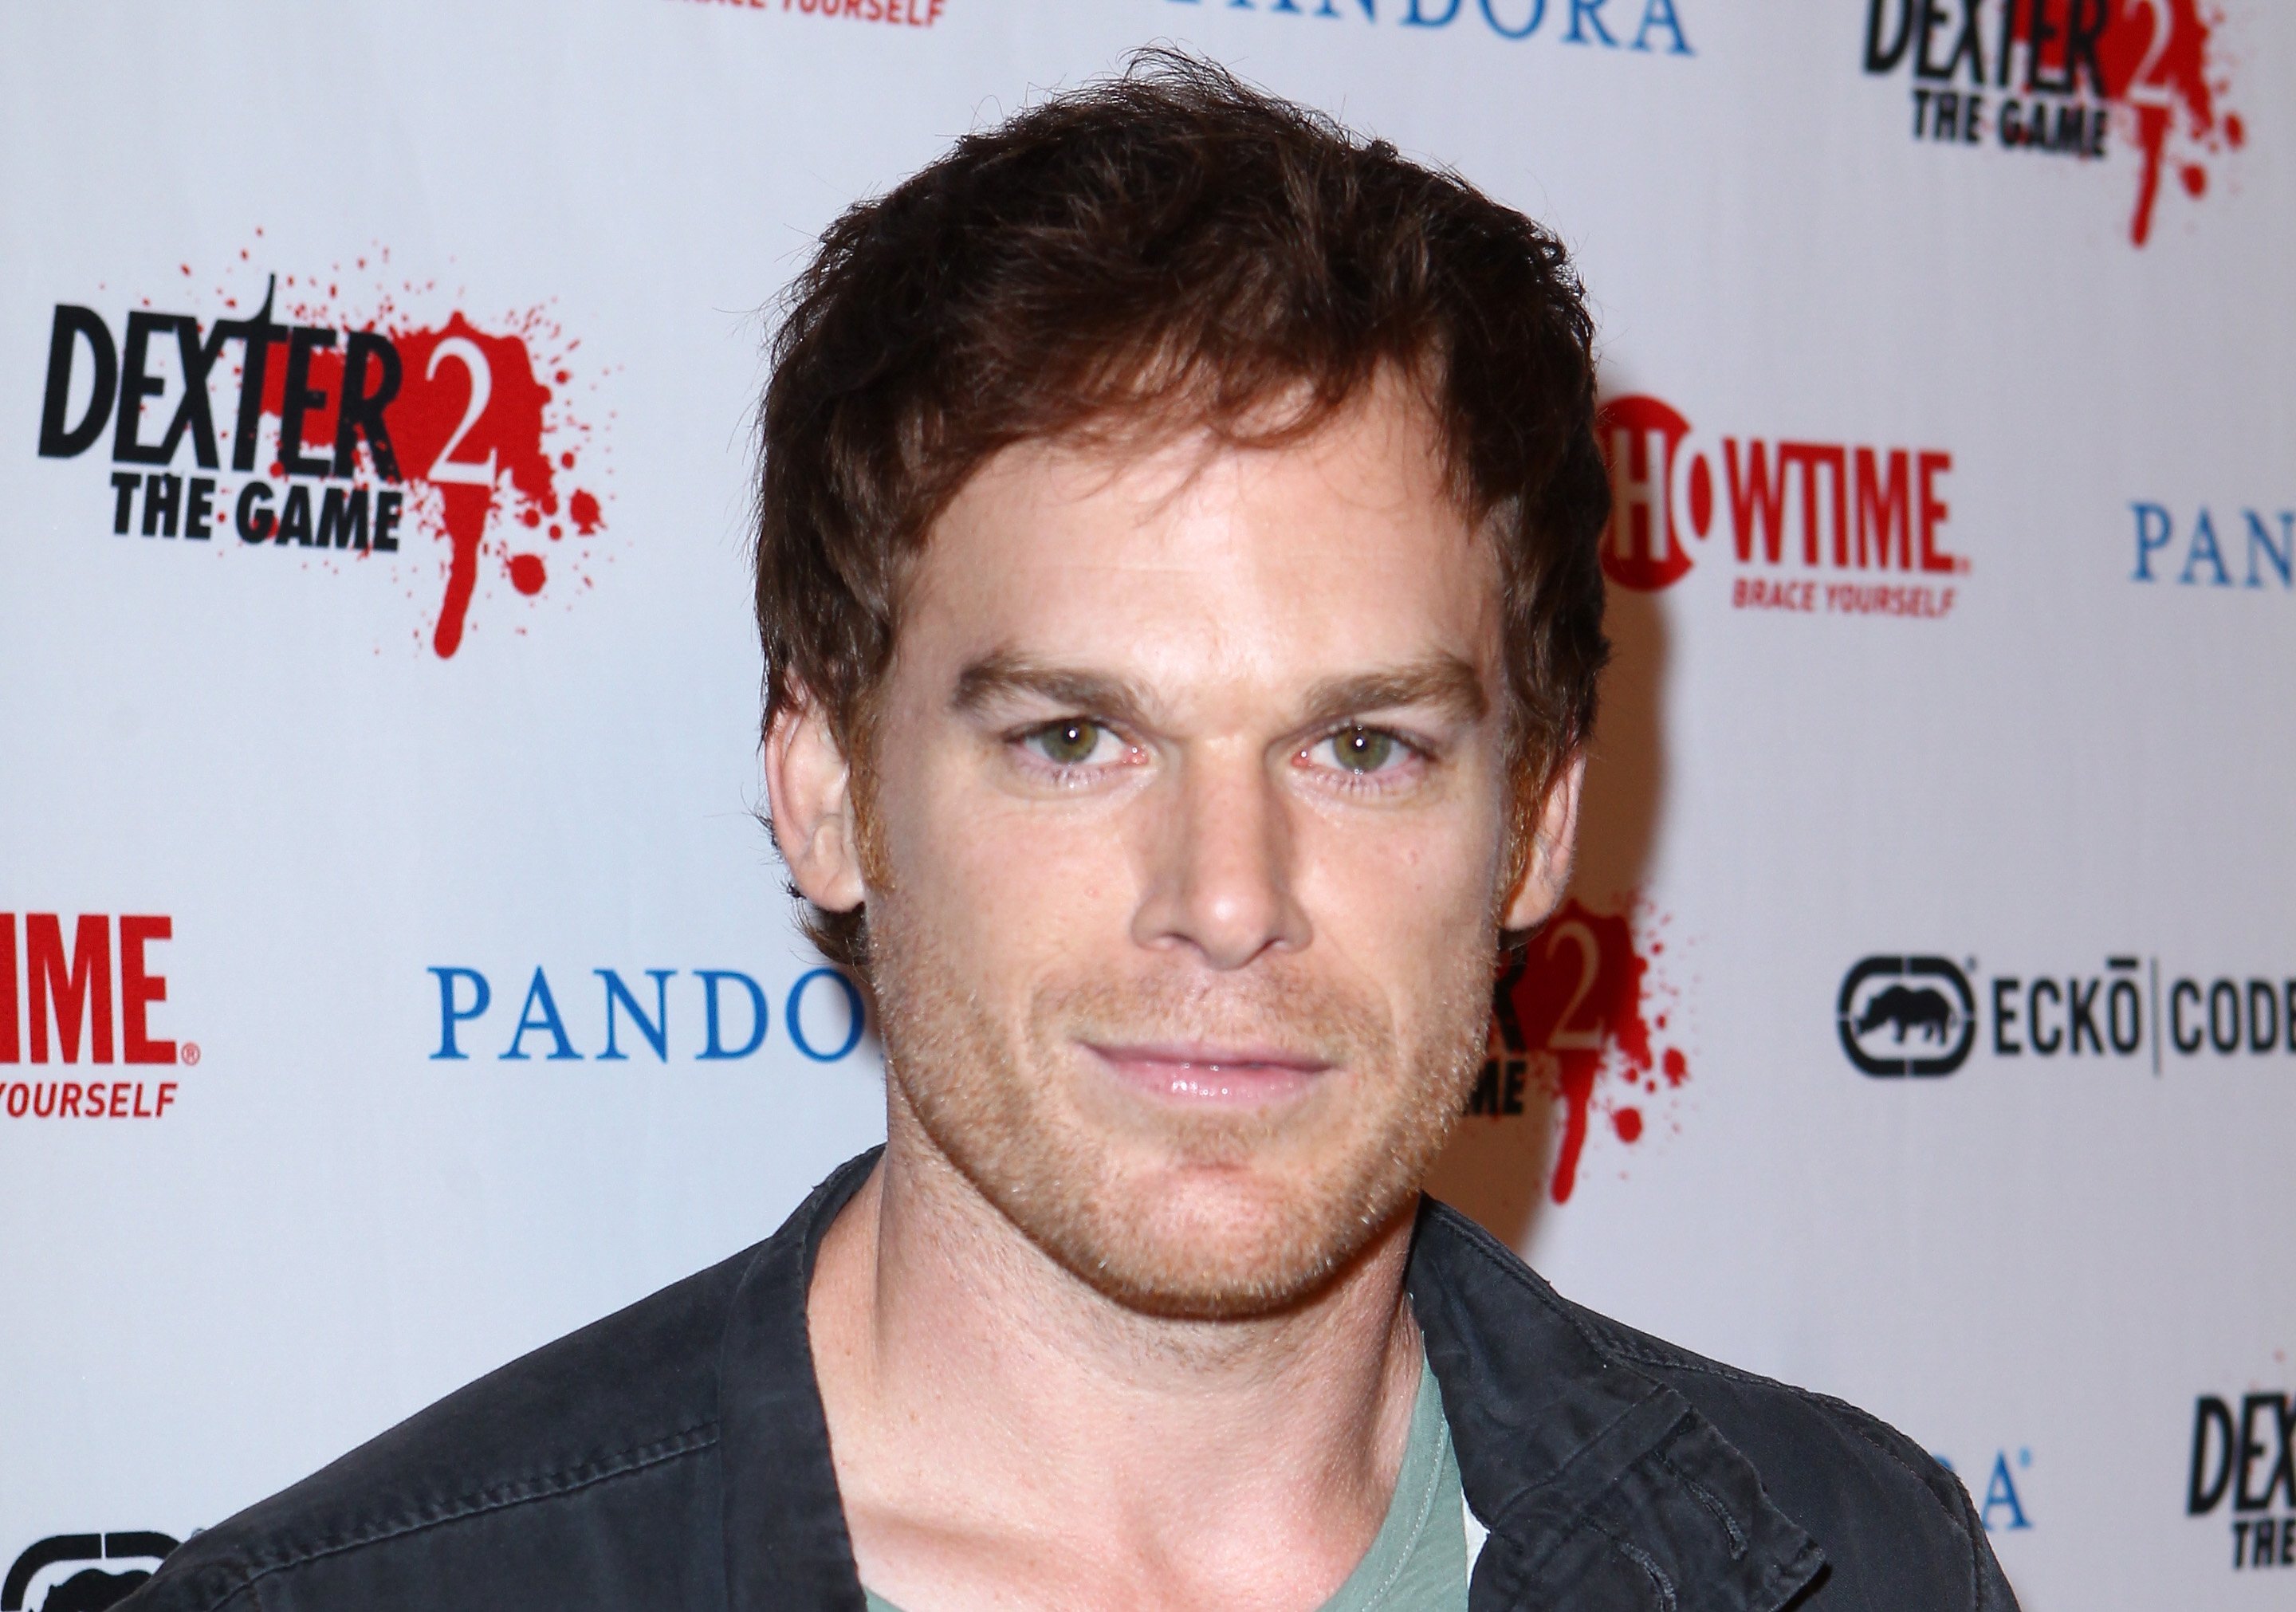 Michael C. Hall at an event